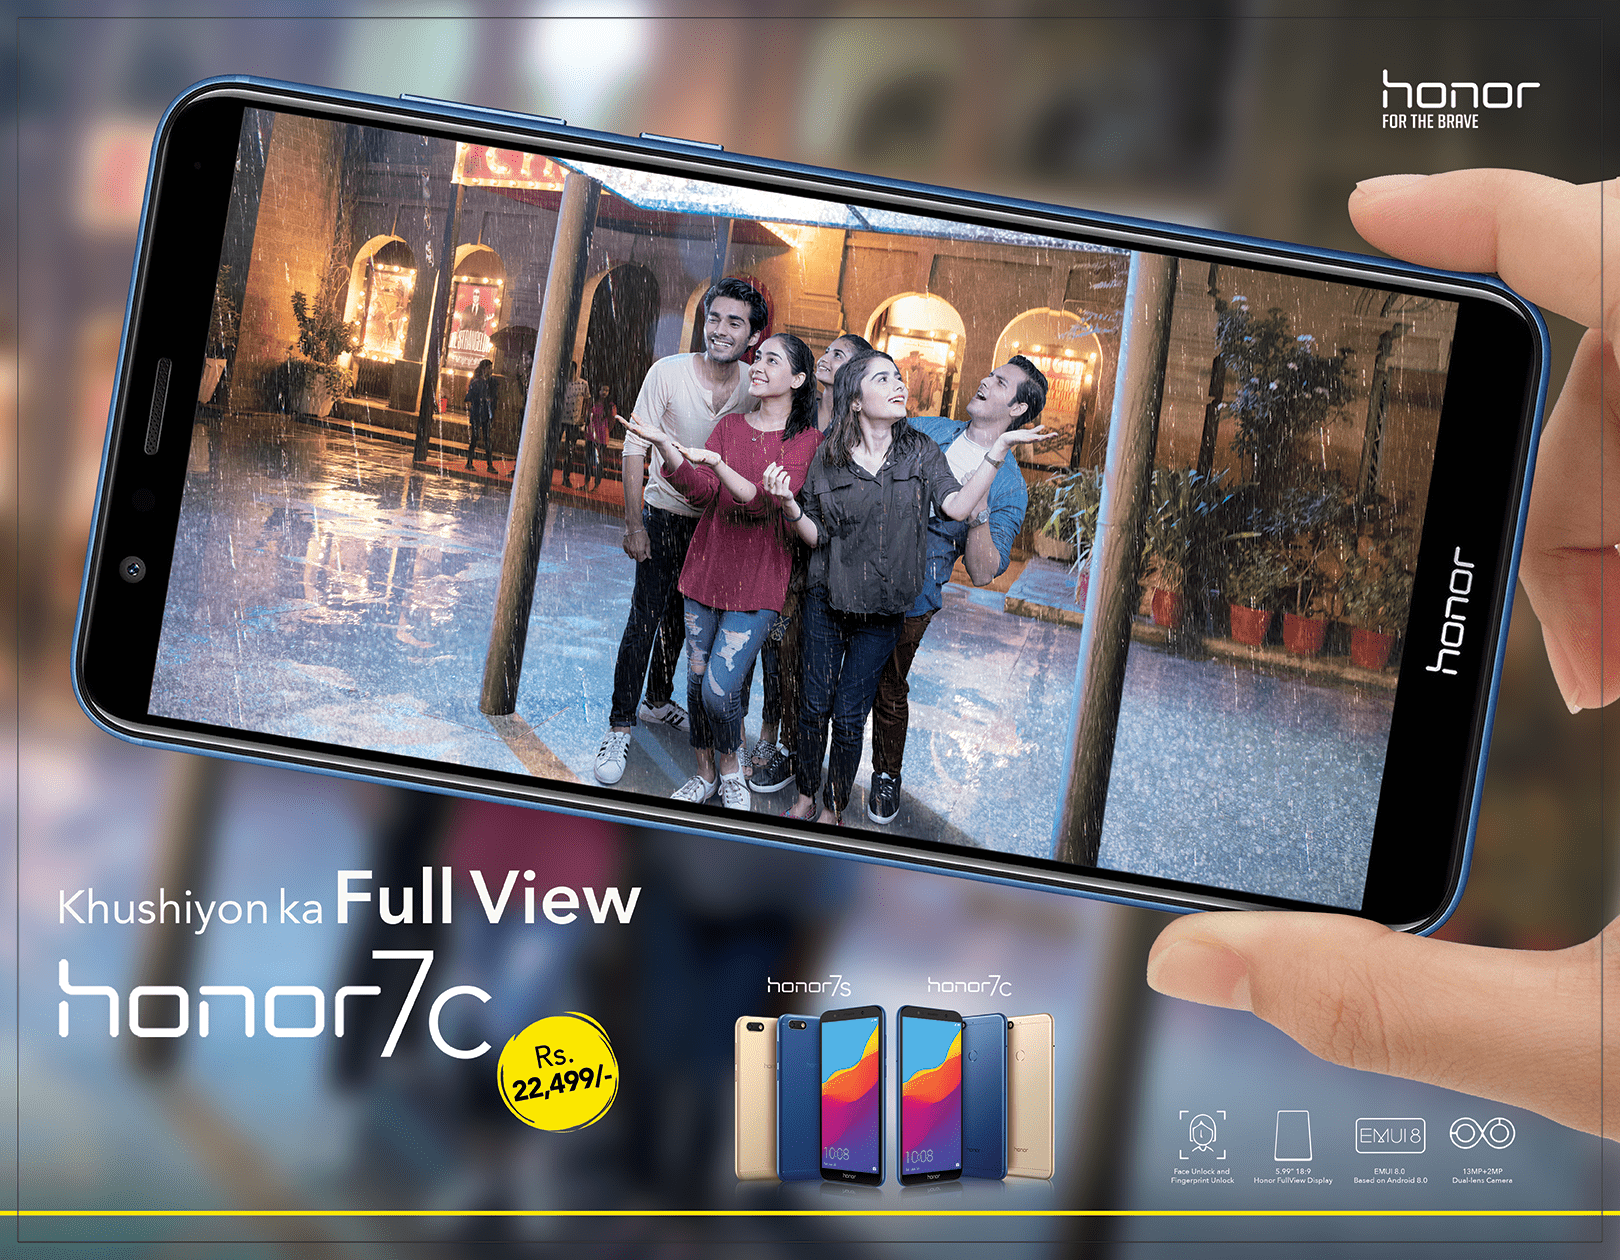 Honor 7 series showcases Khushiyon ka Full View with its newest TVC